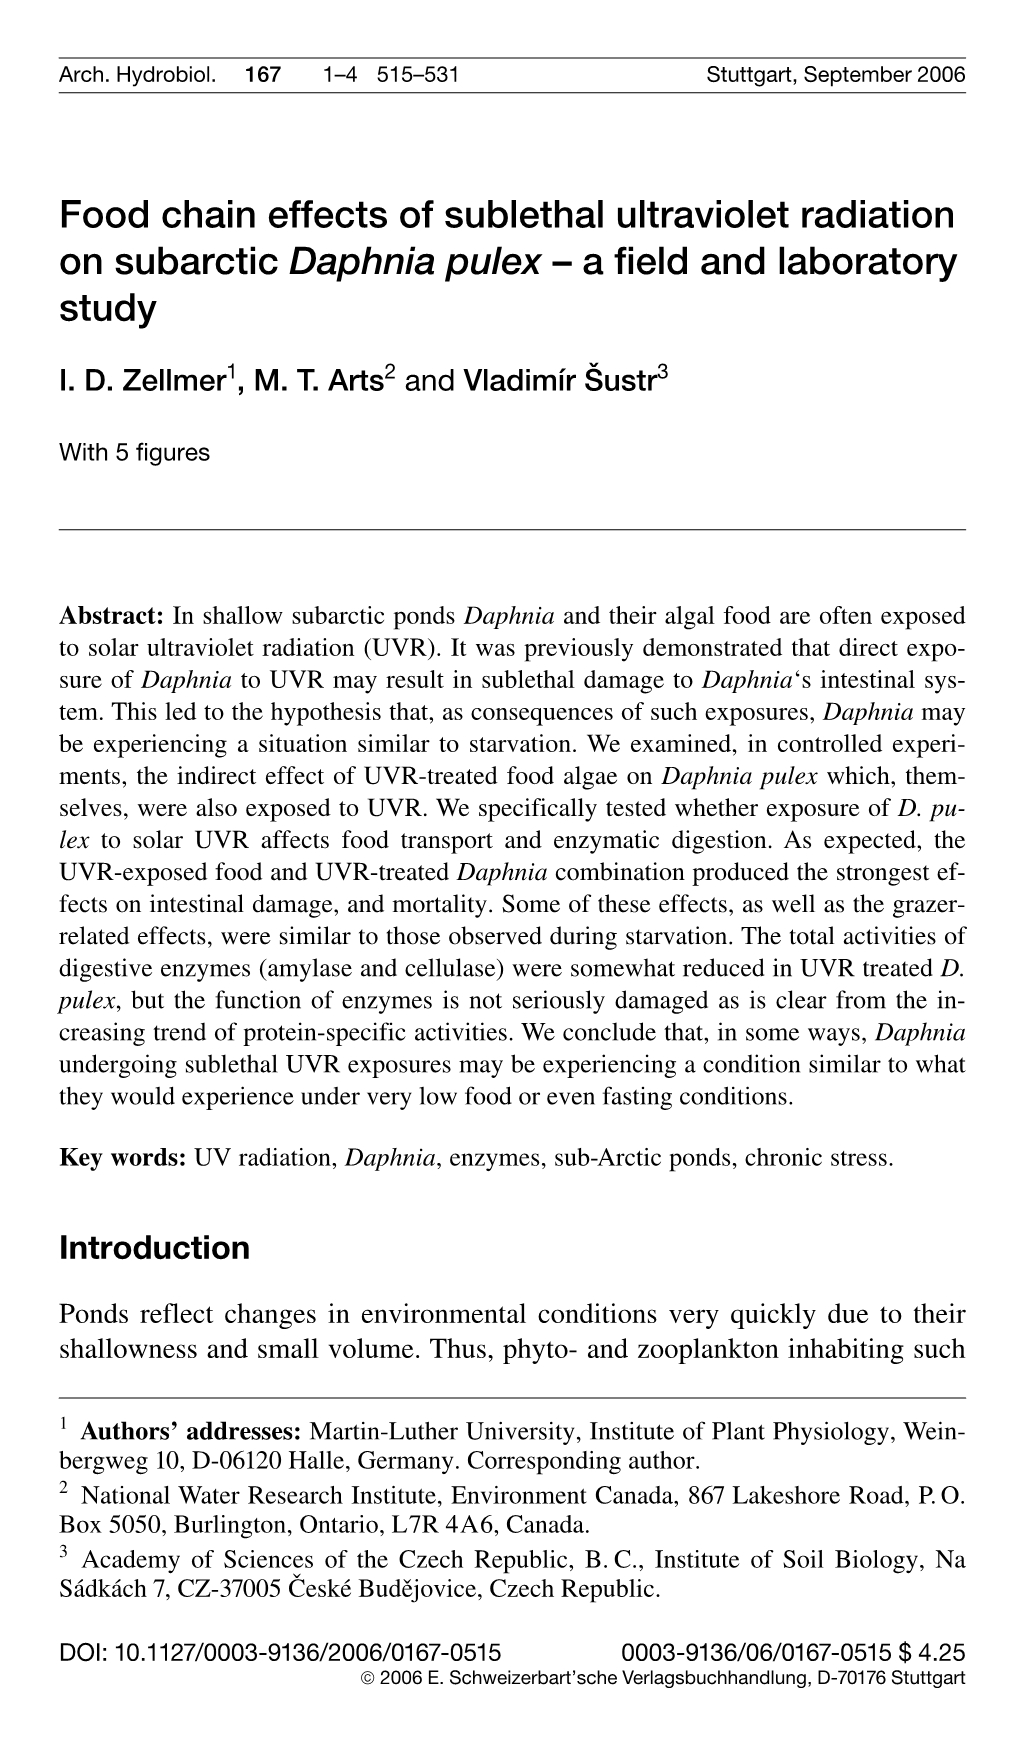 Food Chain Effects of Sublethal Ultraviolet Radiation on Subarctic Daphnia Pulex – a Field and Laboratory Study